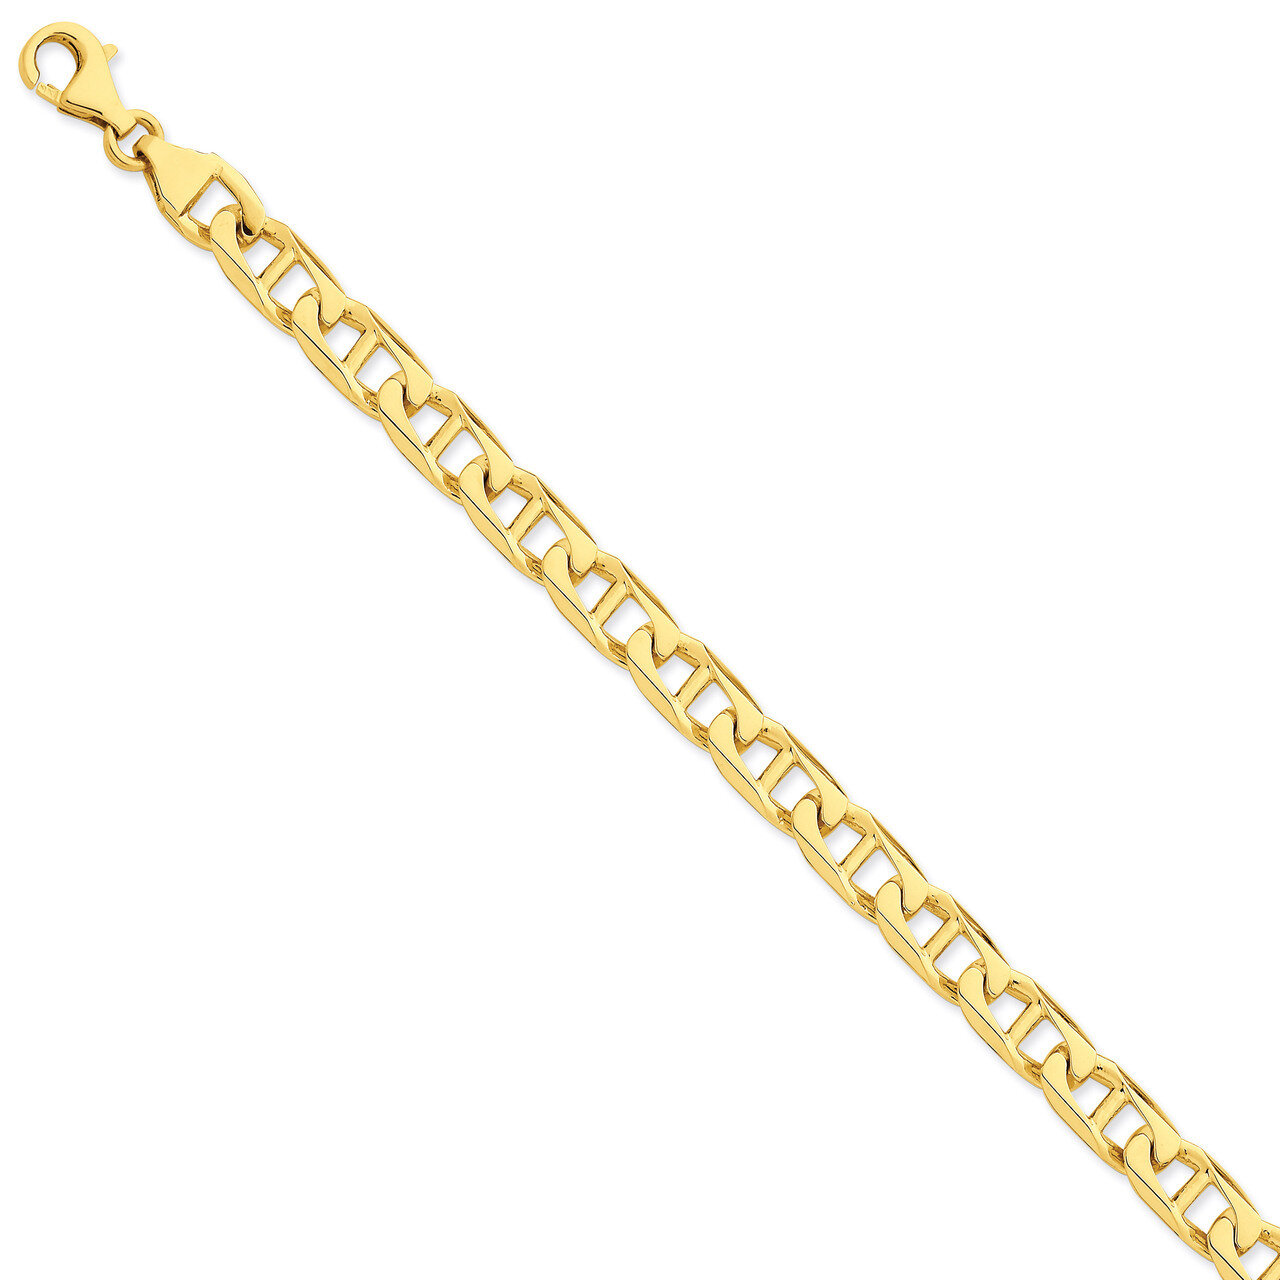 9mm Hand-Polished Anchor Link Chain 22 Inch 14k Gold LK101-22